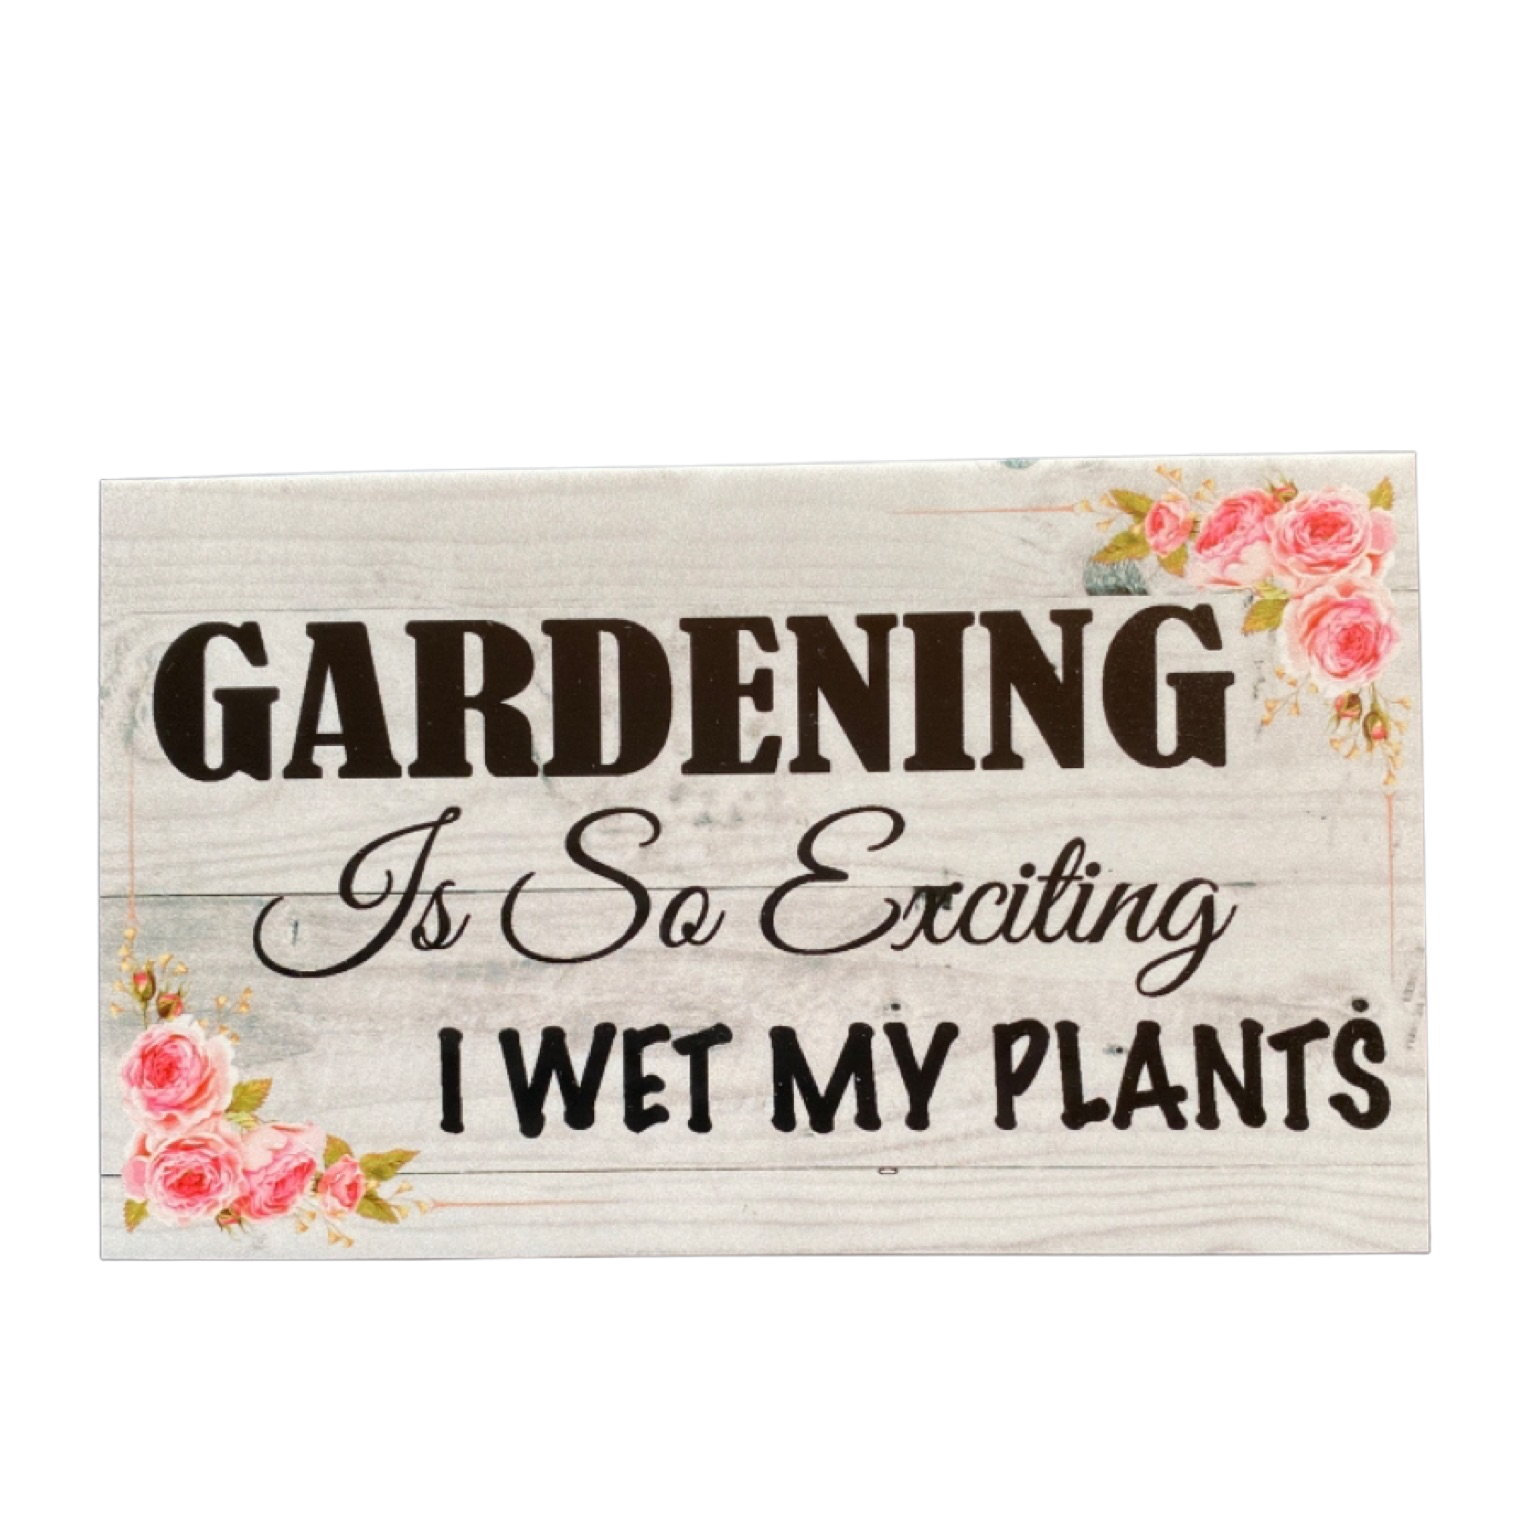 Gardening Exciting Wet My Plants Funny Gardener Sign - The Renmy Store Homewares & Gifts 